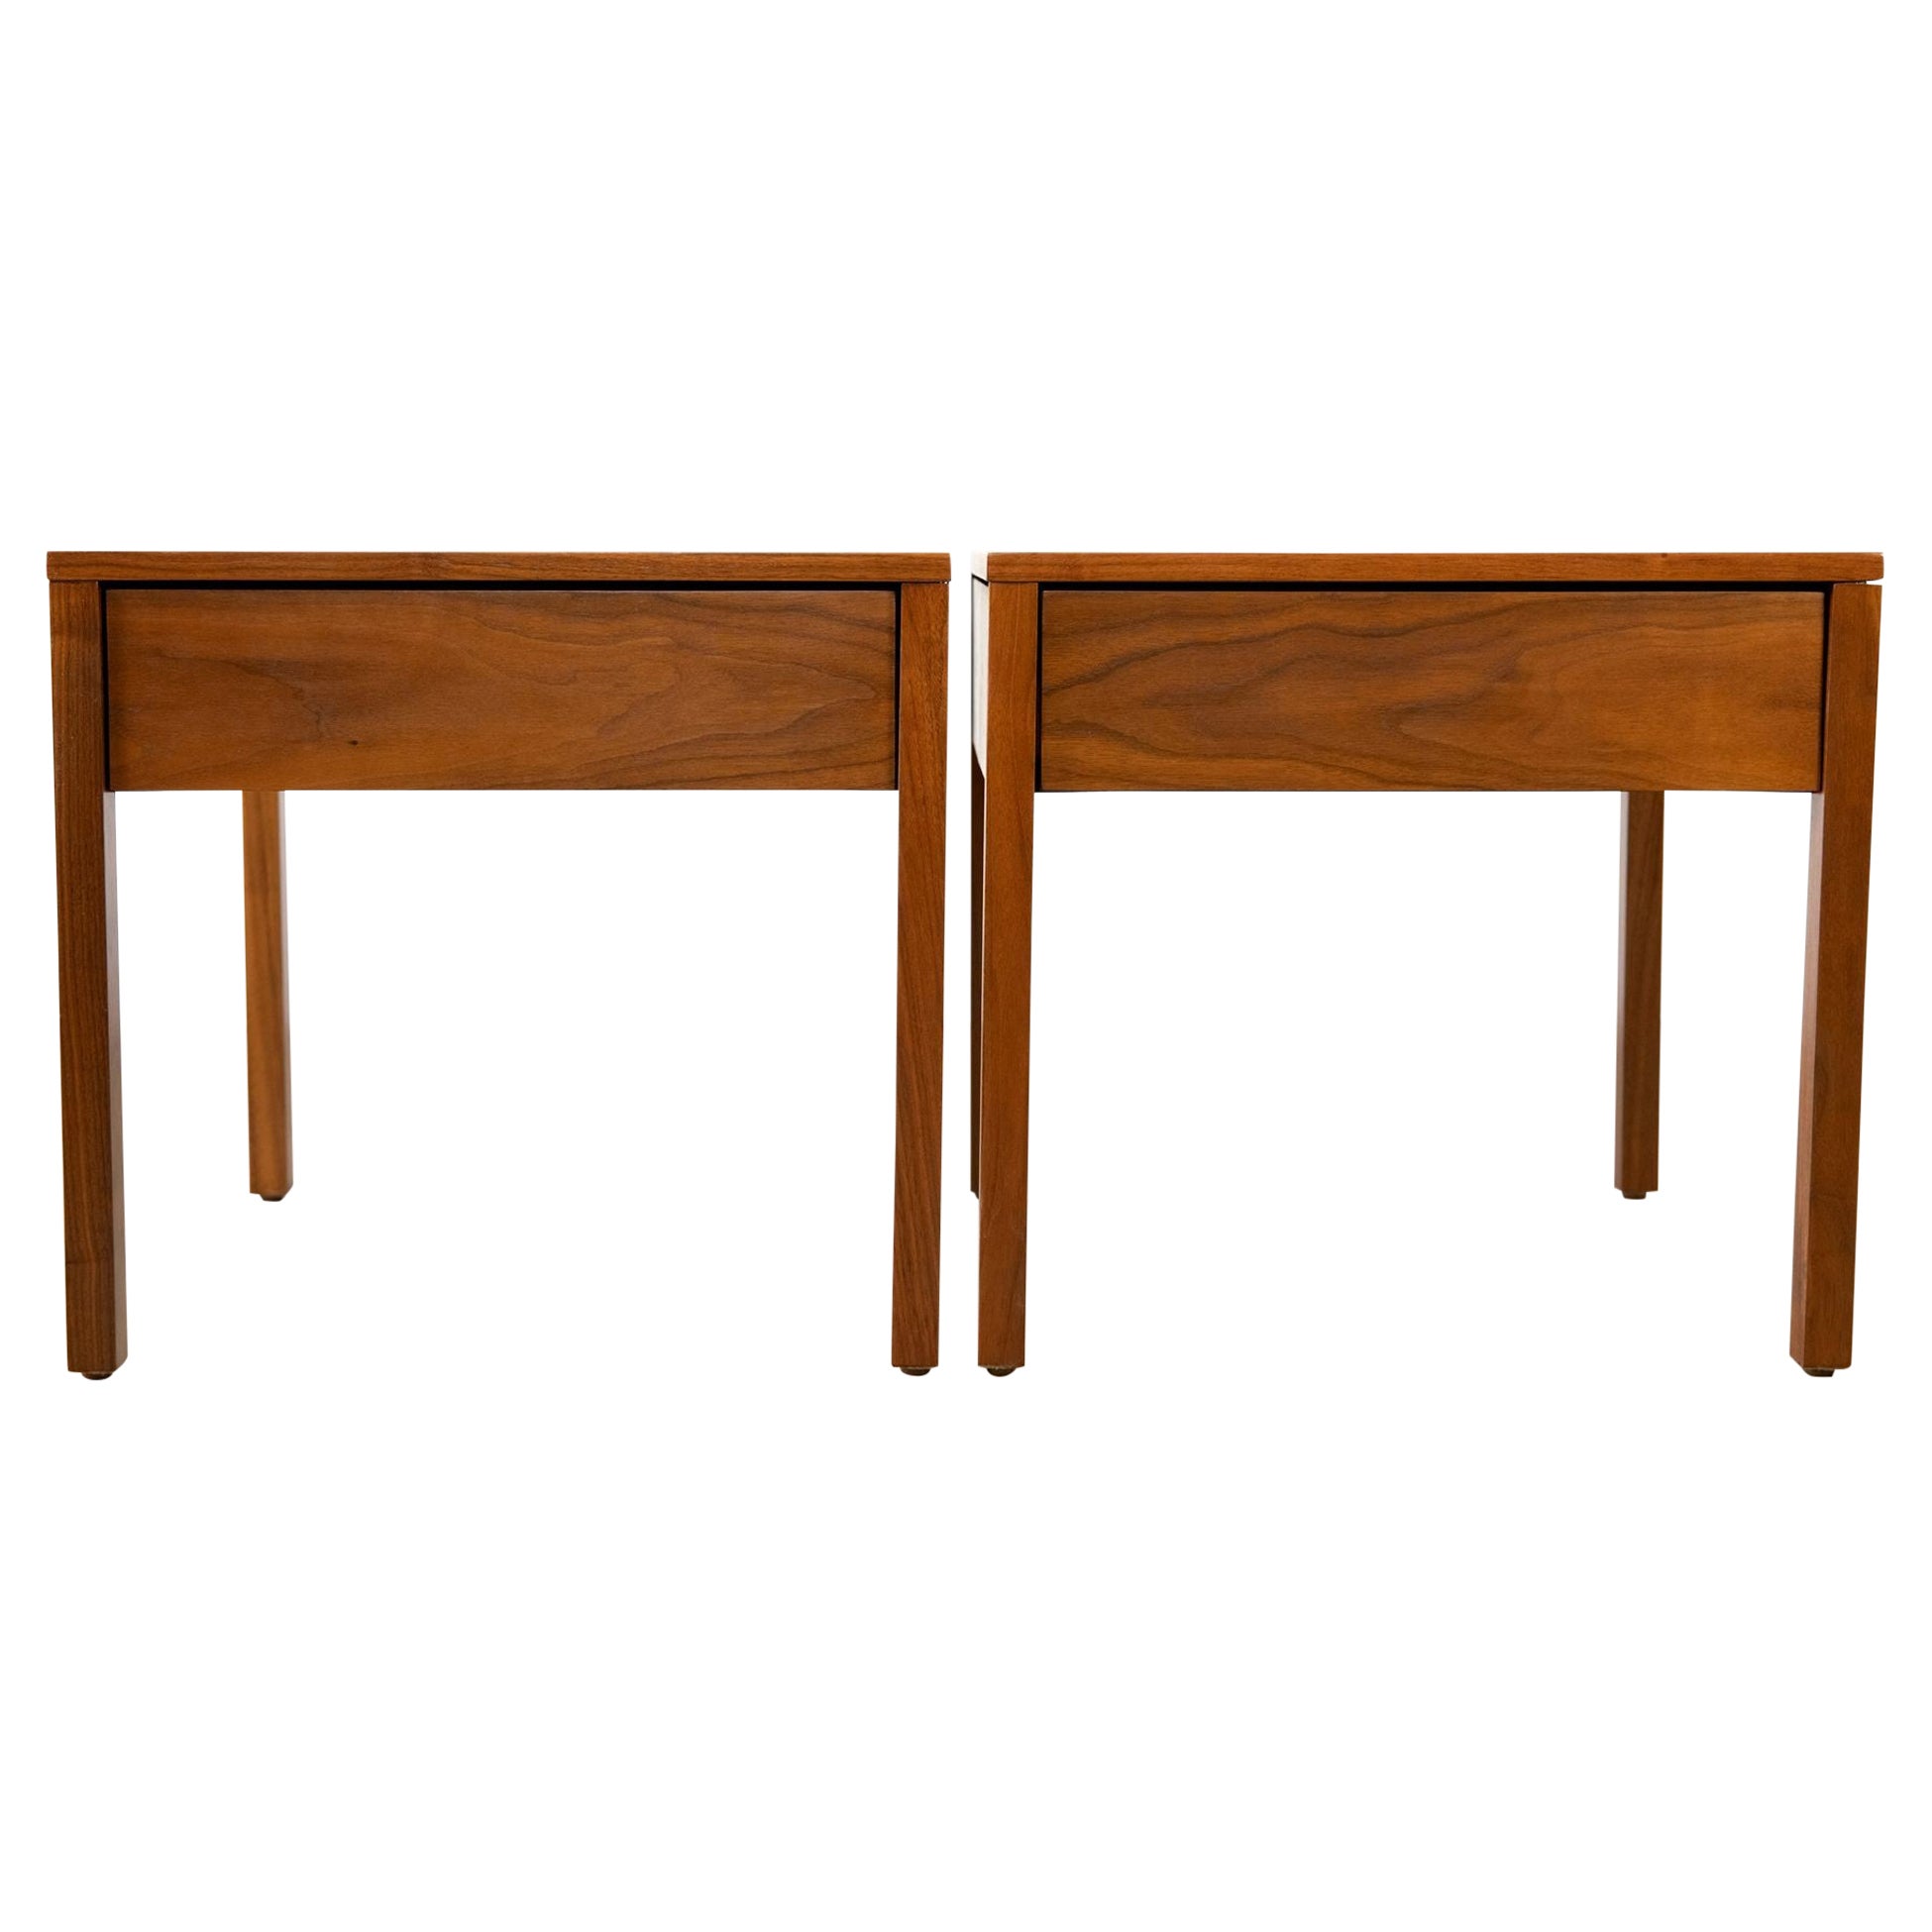 Florence Knoll Nightstands in Walnut for Knoll Associates Early Production